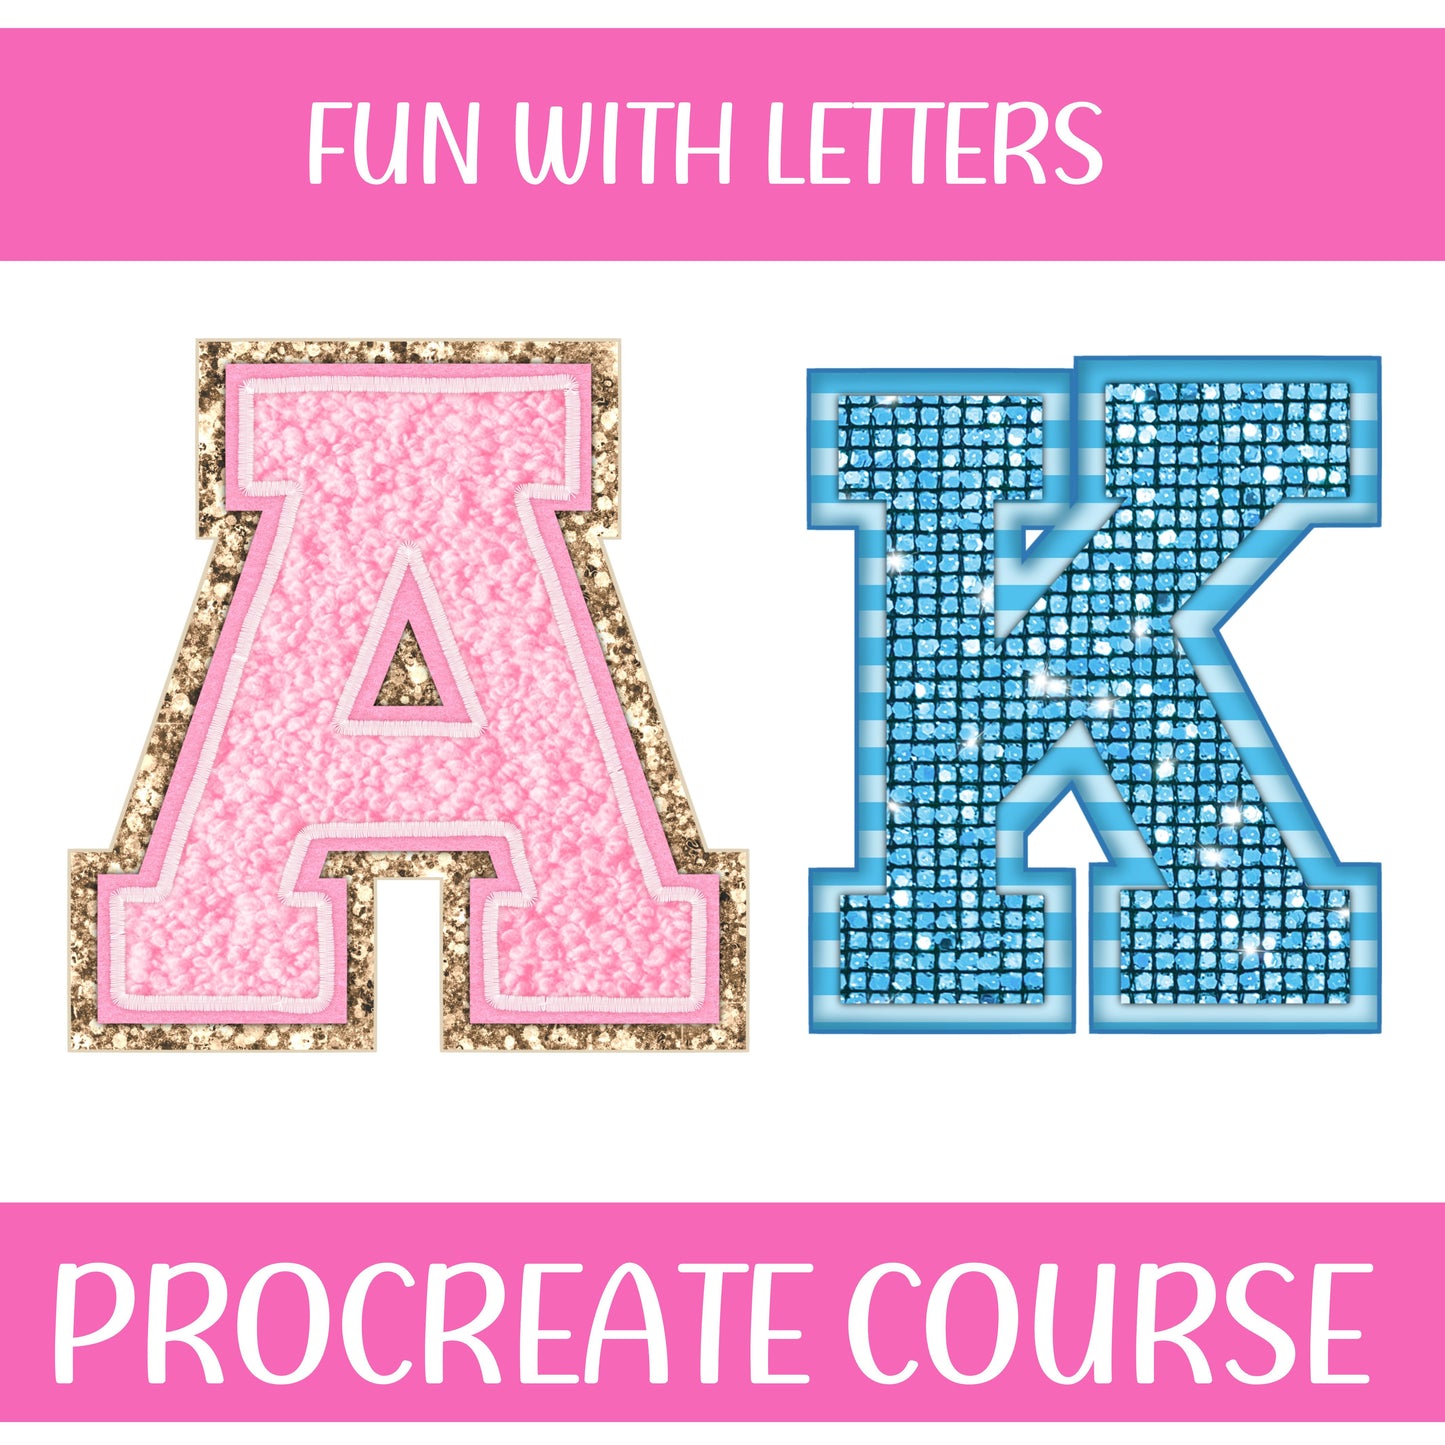 FUN WITH LETTERS PROCREATE COURSE